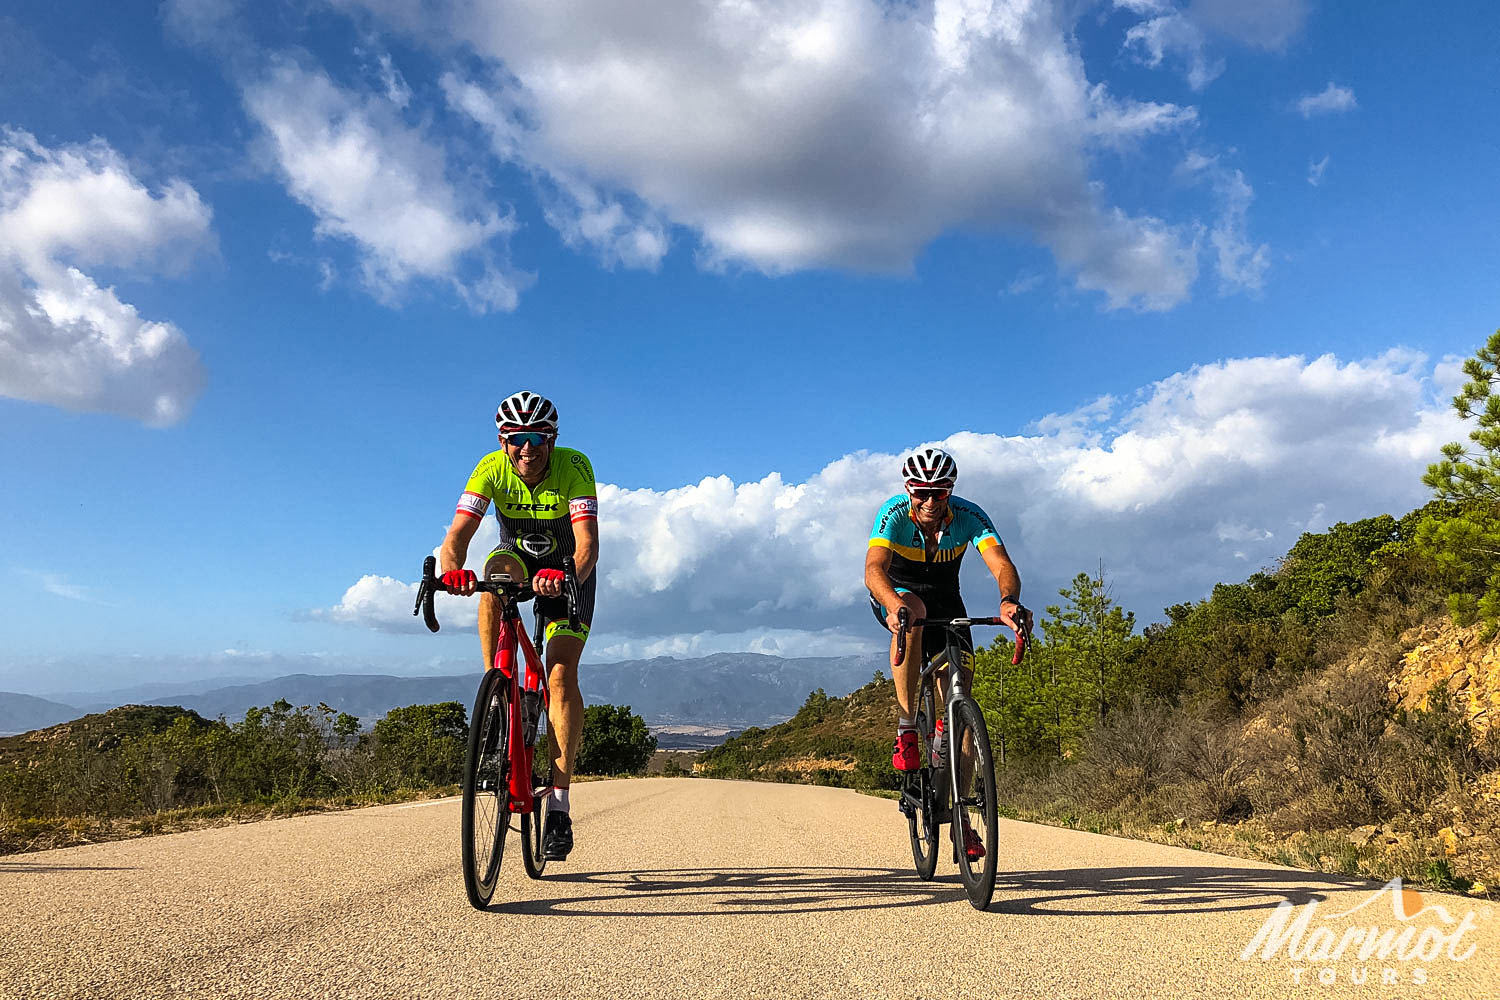 Pair of cyclists and mountain backdrop on sunny day on Marmot Tours full support cycling holiday in Sardinia